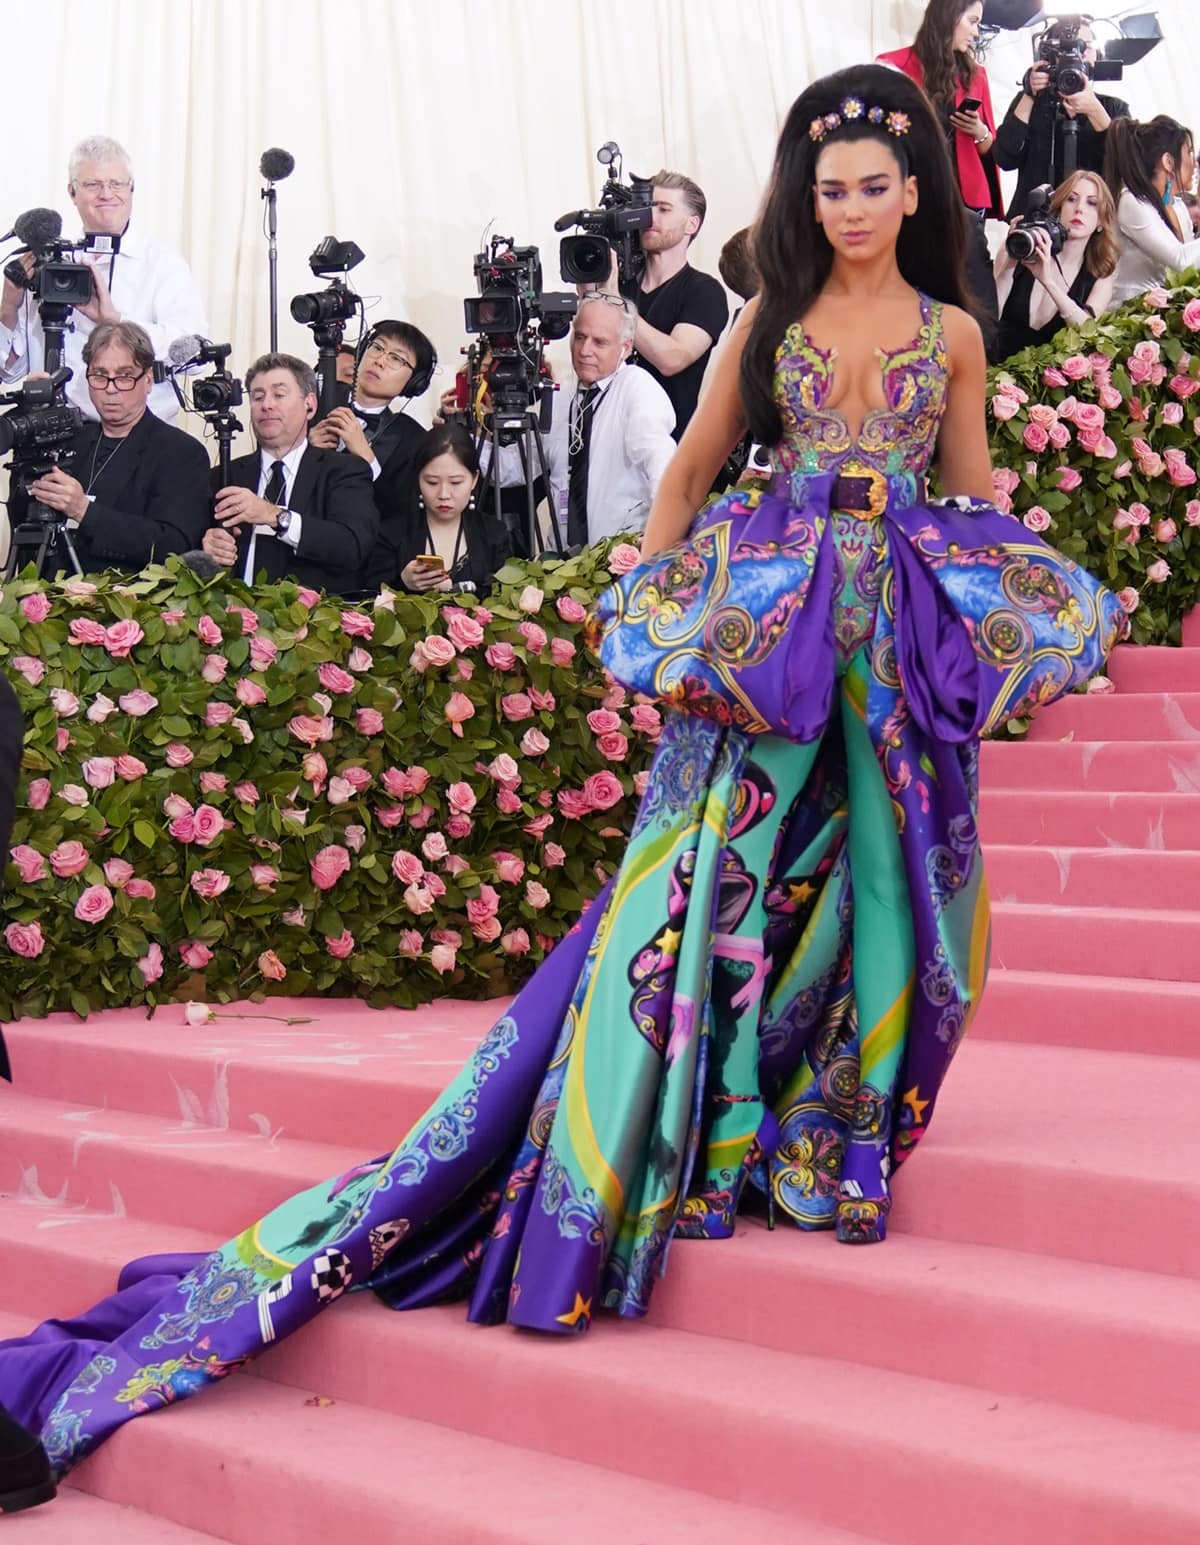 Dua Lipa wore an eye-catching Atelier Versace gown that was perfectly suited to the occasion at the 2019 Met Gala celebrating Camp: Notes on Fashion